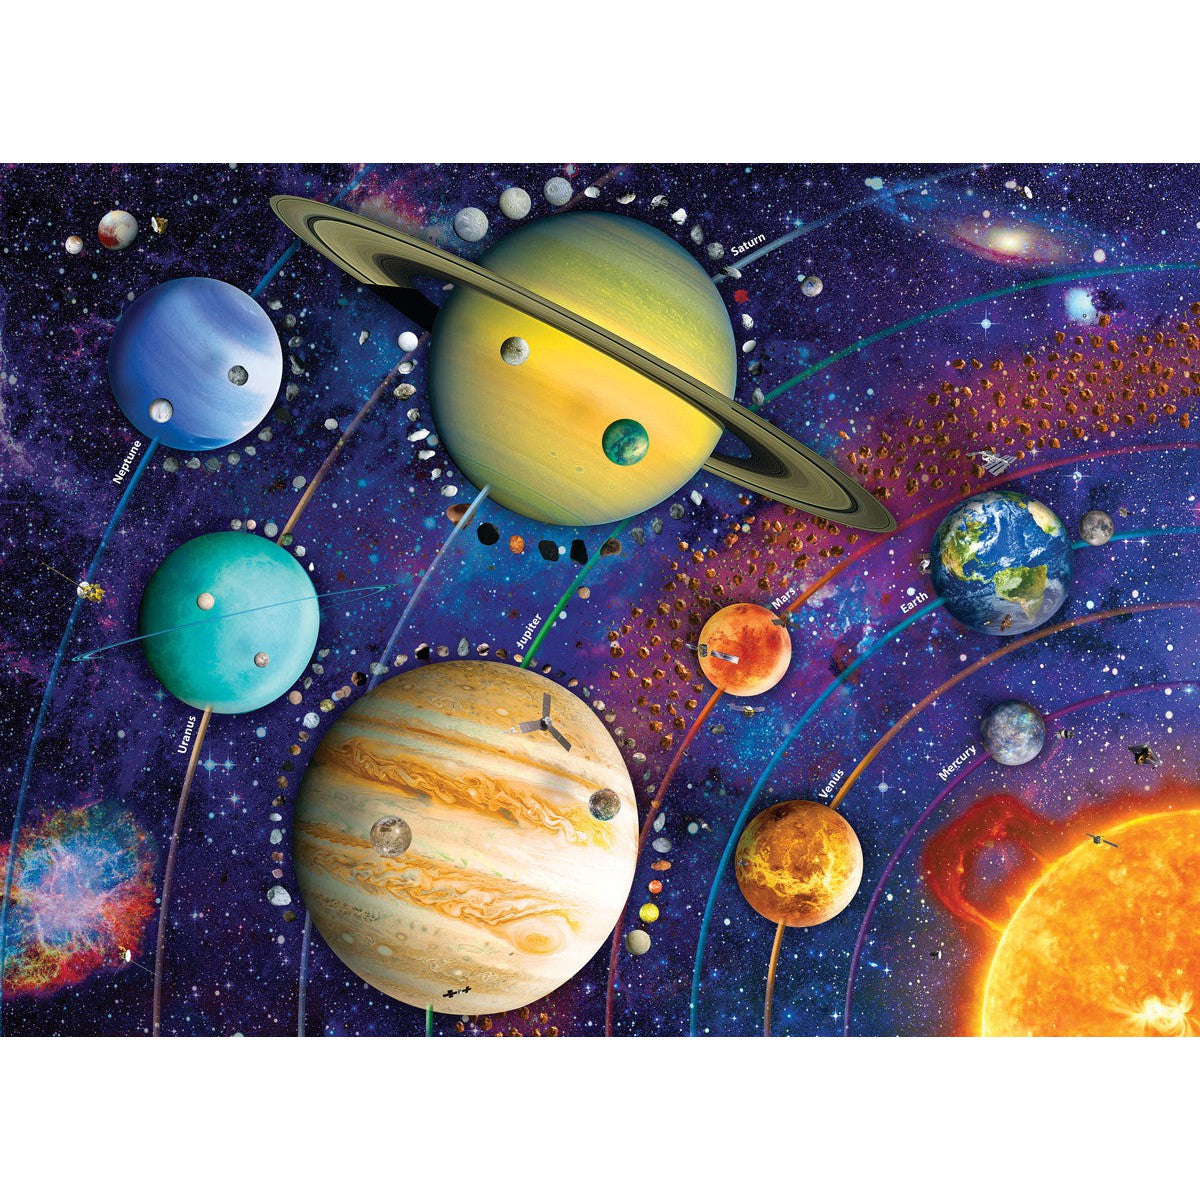 Planets of the Solar System 1000 Piece Jigsaw Puzzle Eurographics